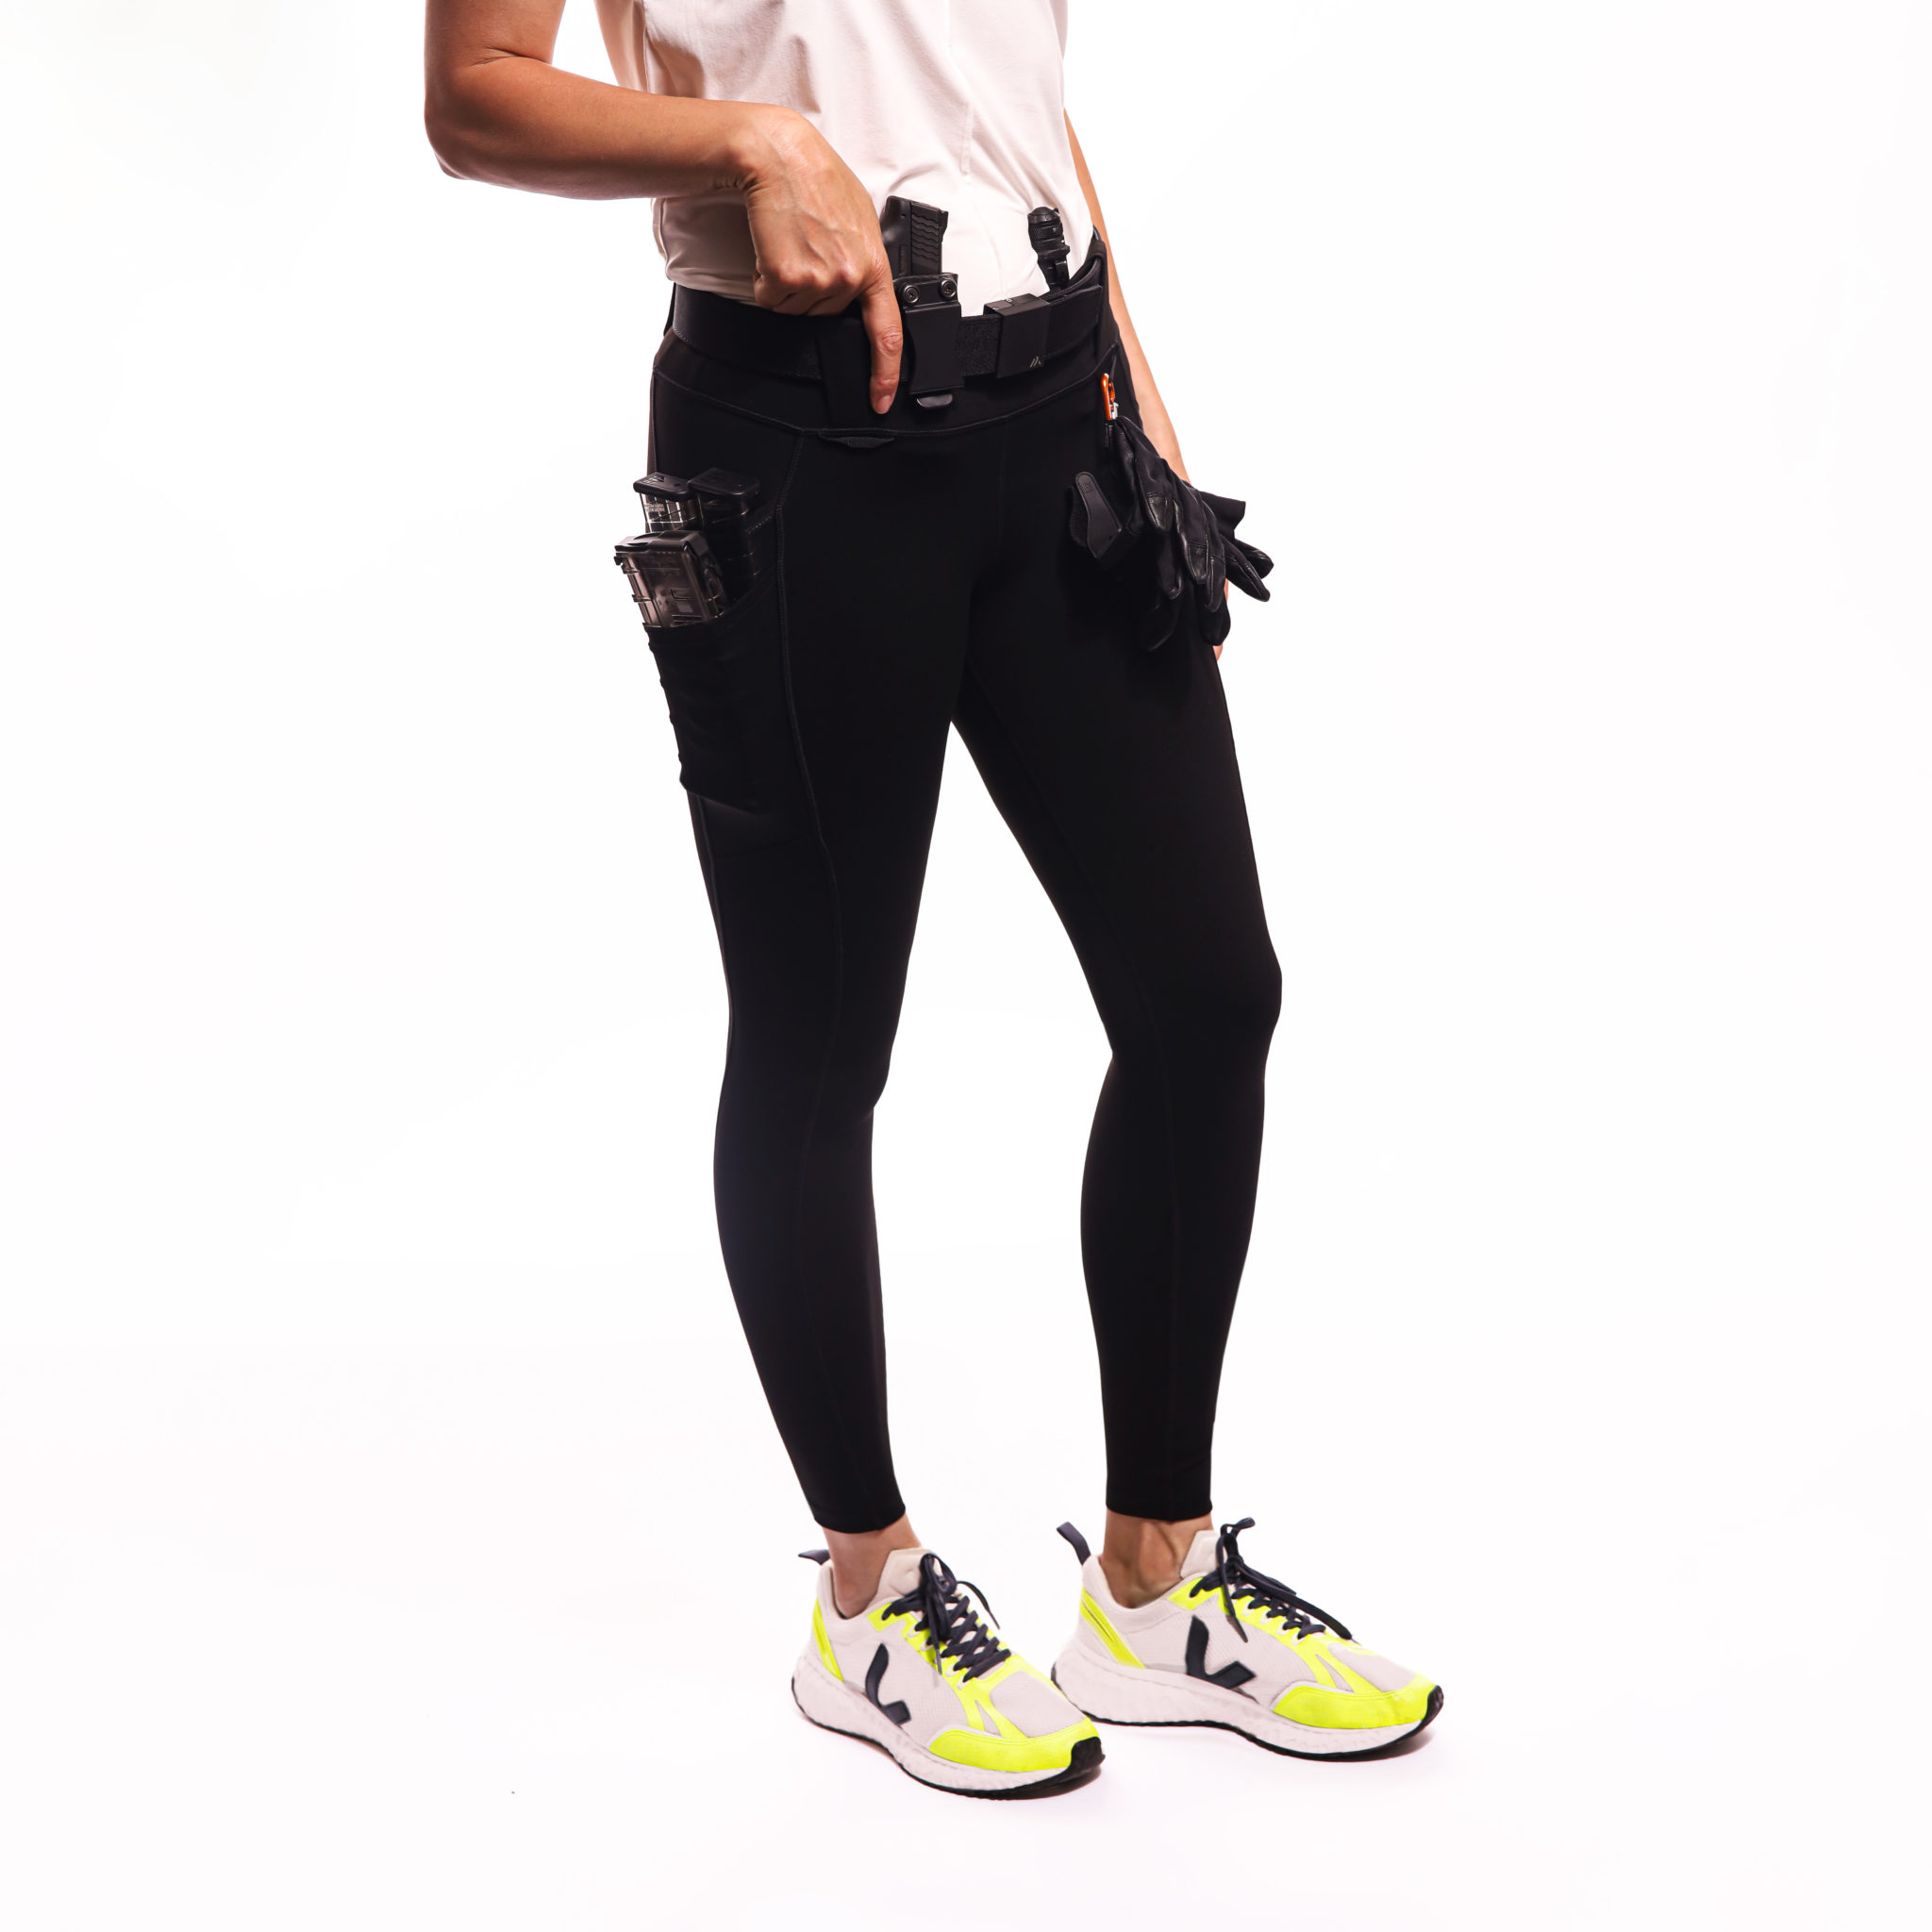 The Rangewear Legging (with belt loops) from Alexo Athletica